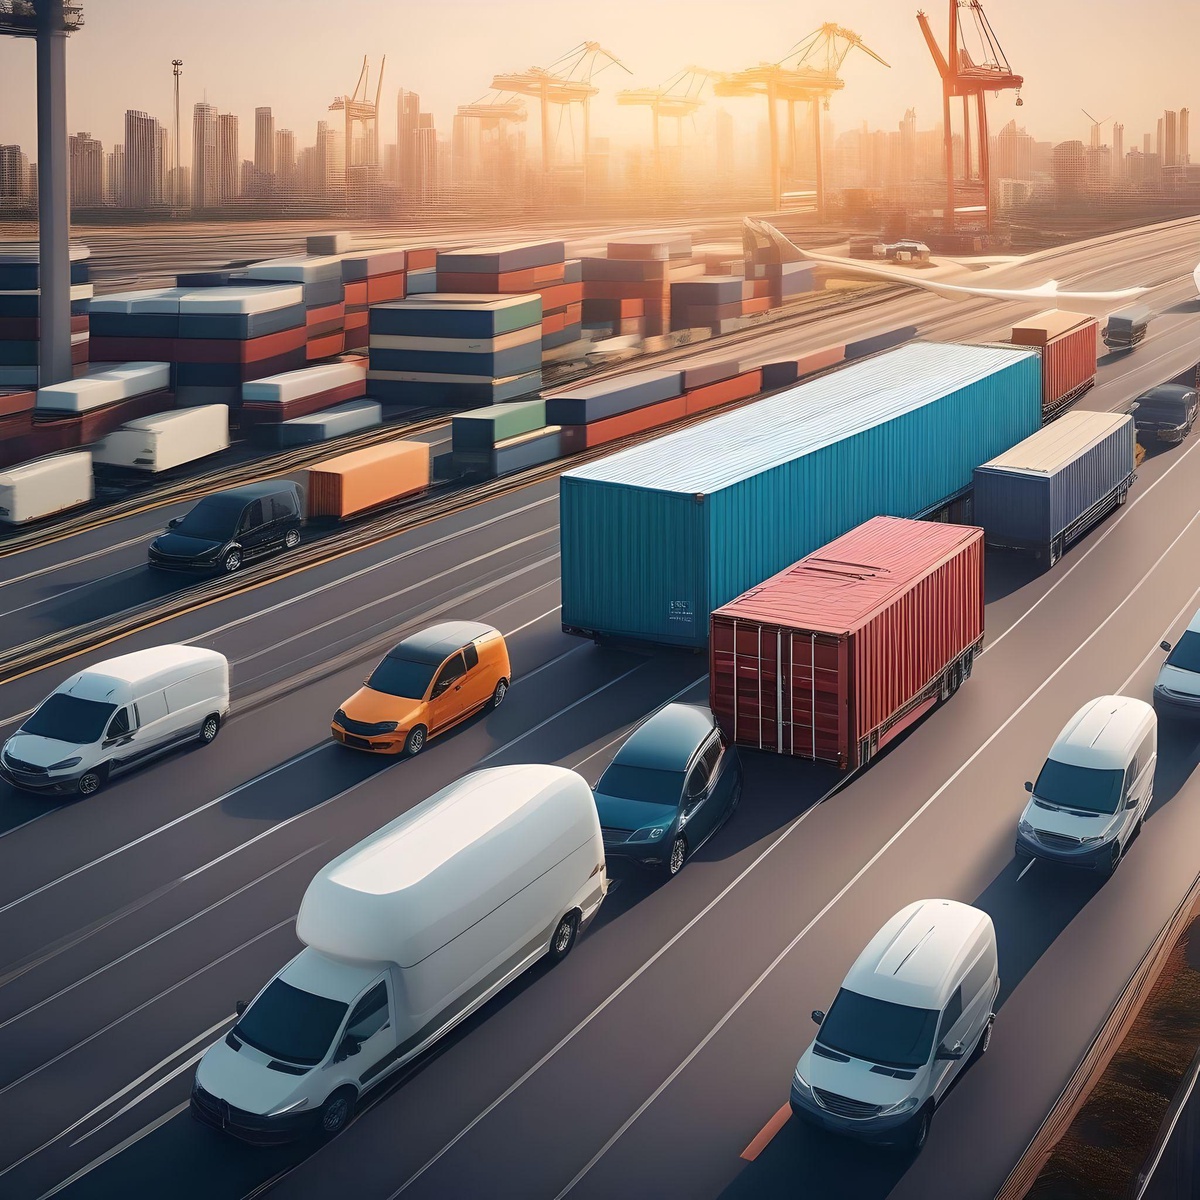 AI Transportation Solution Transforms Industry in 5 Ways